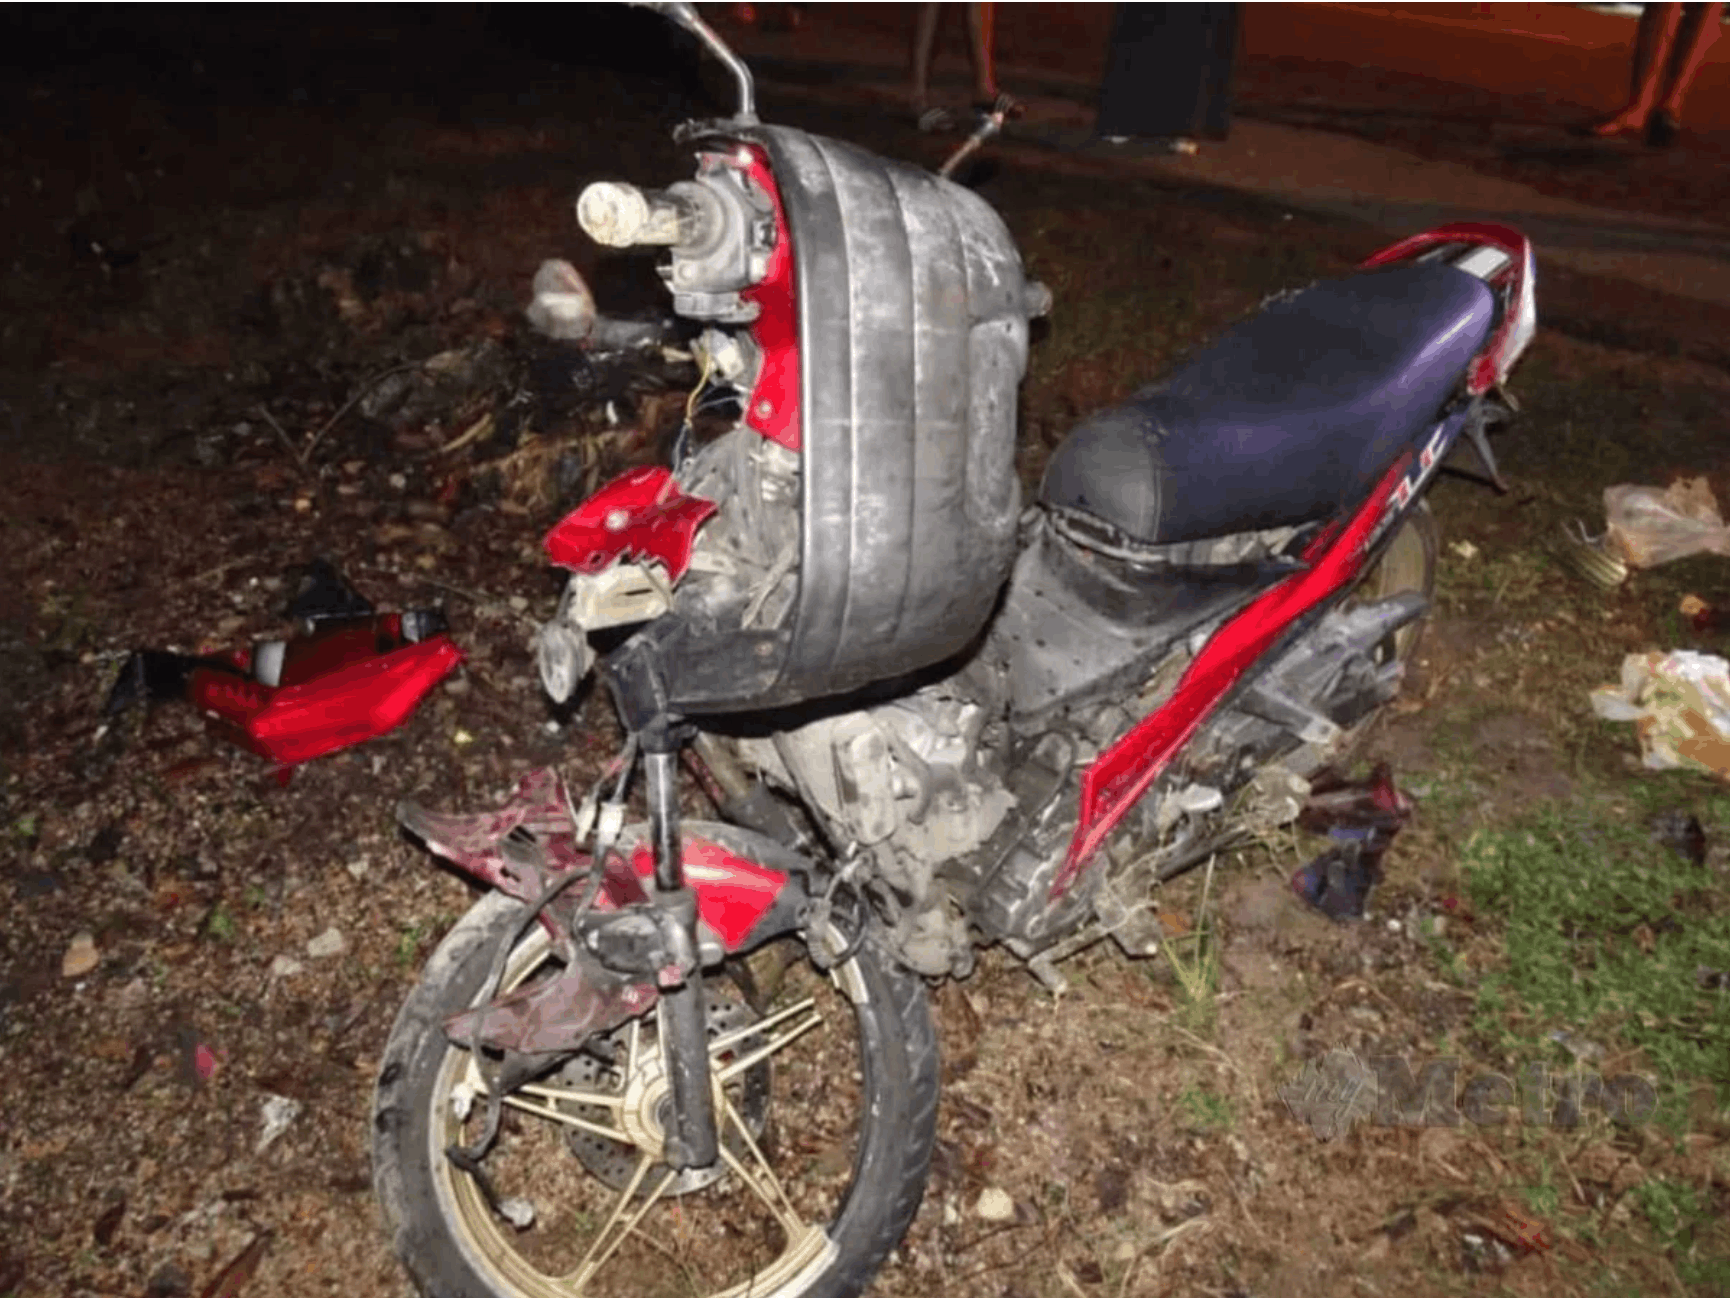 High school student underage for driving motorcycle dies of colliding accident